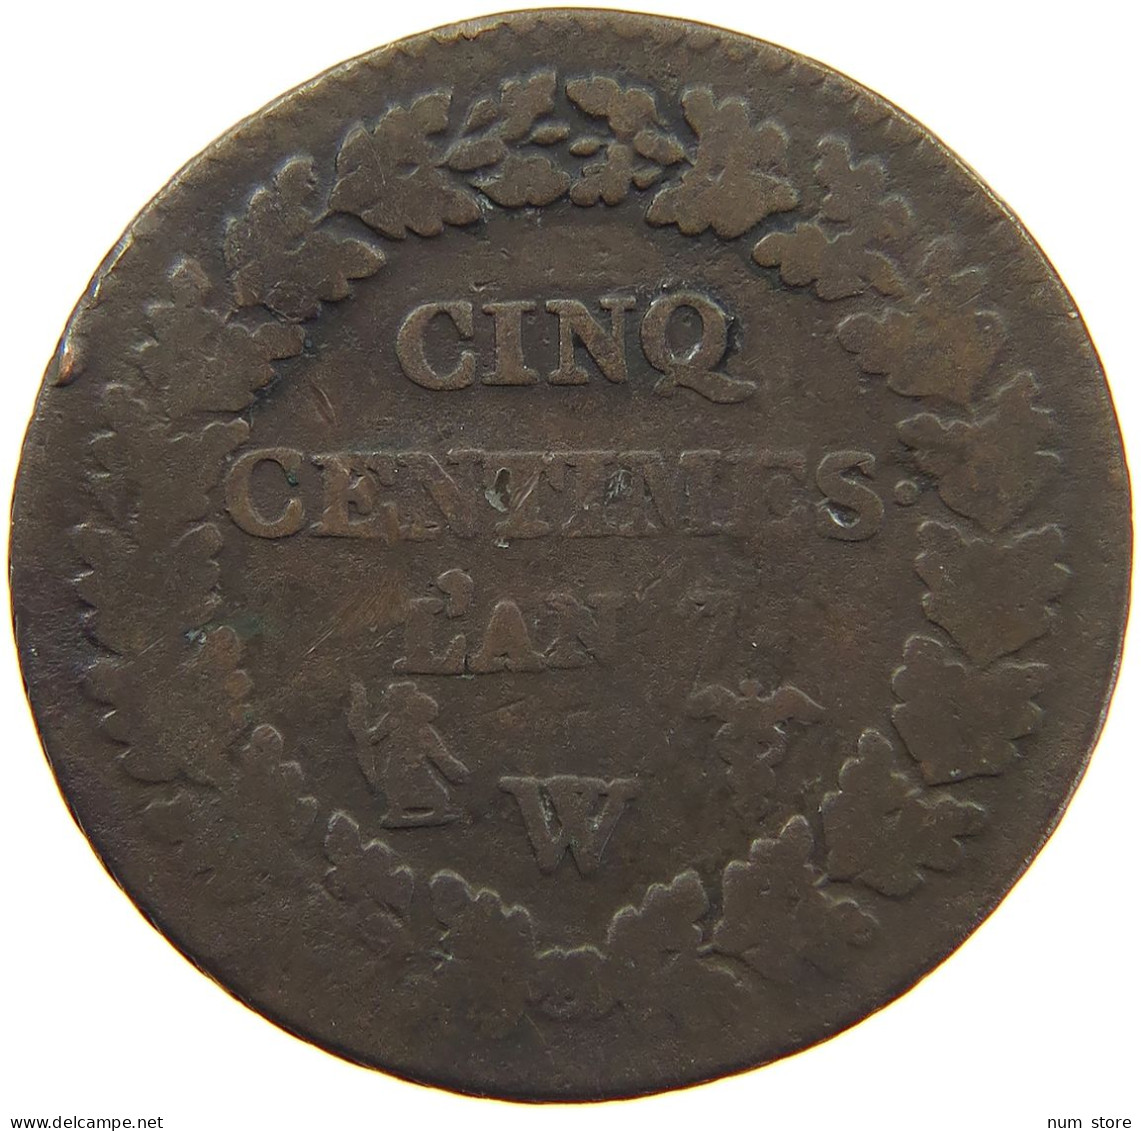 FRANCE 5 CENTIMES AN 7 W  #c061 0107 - 5 Centimes